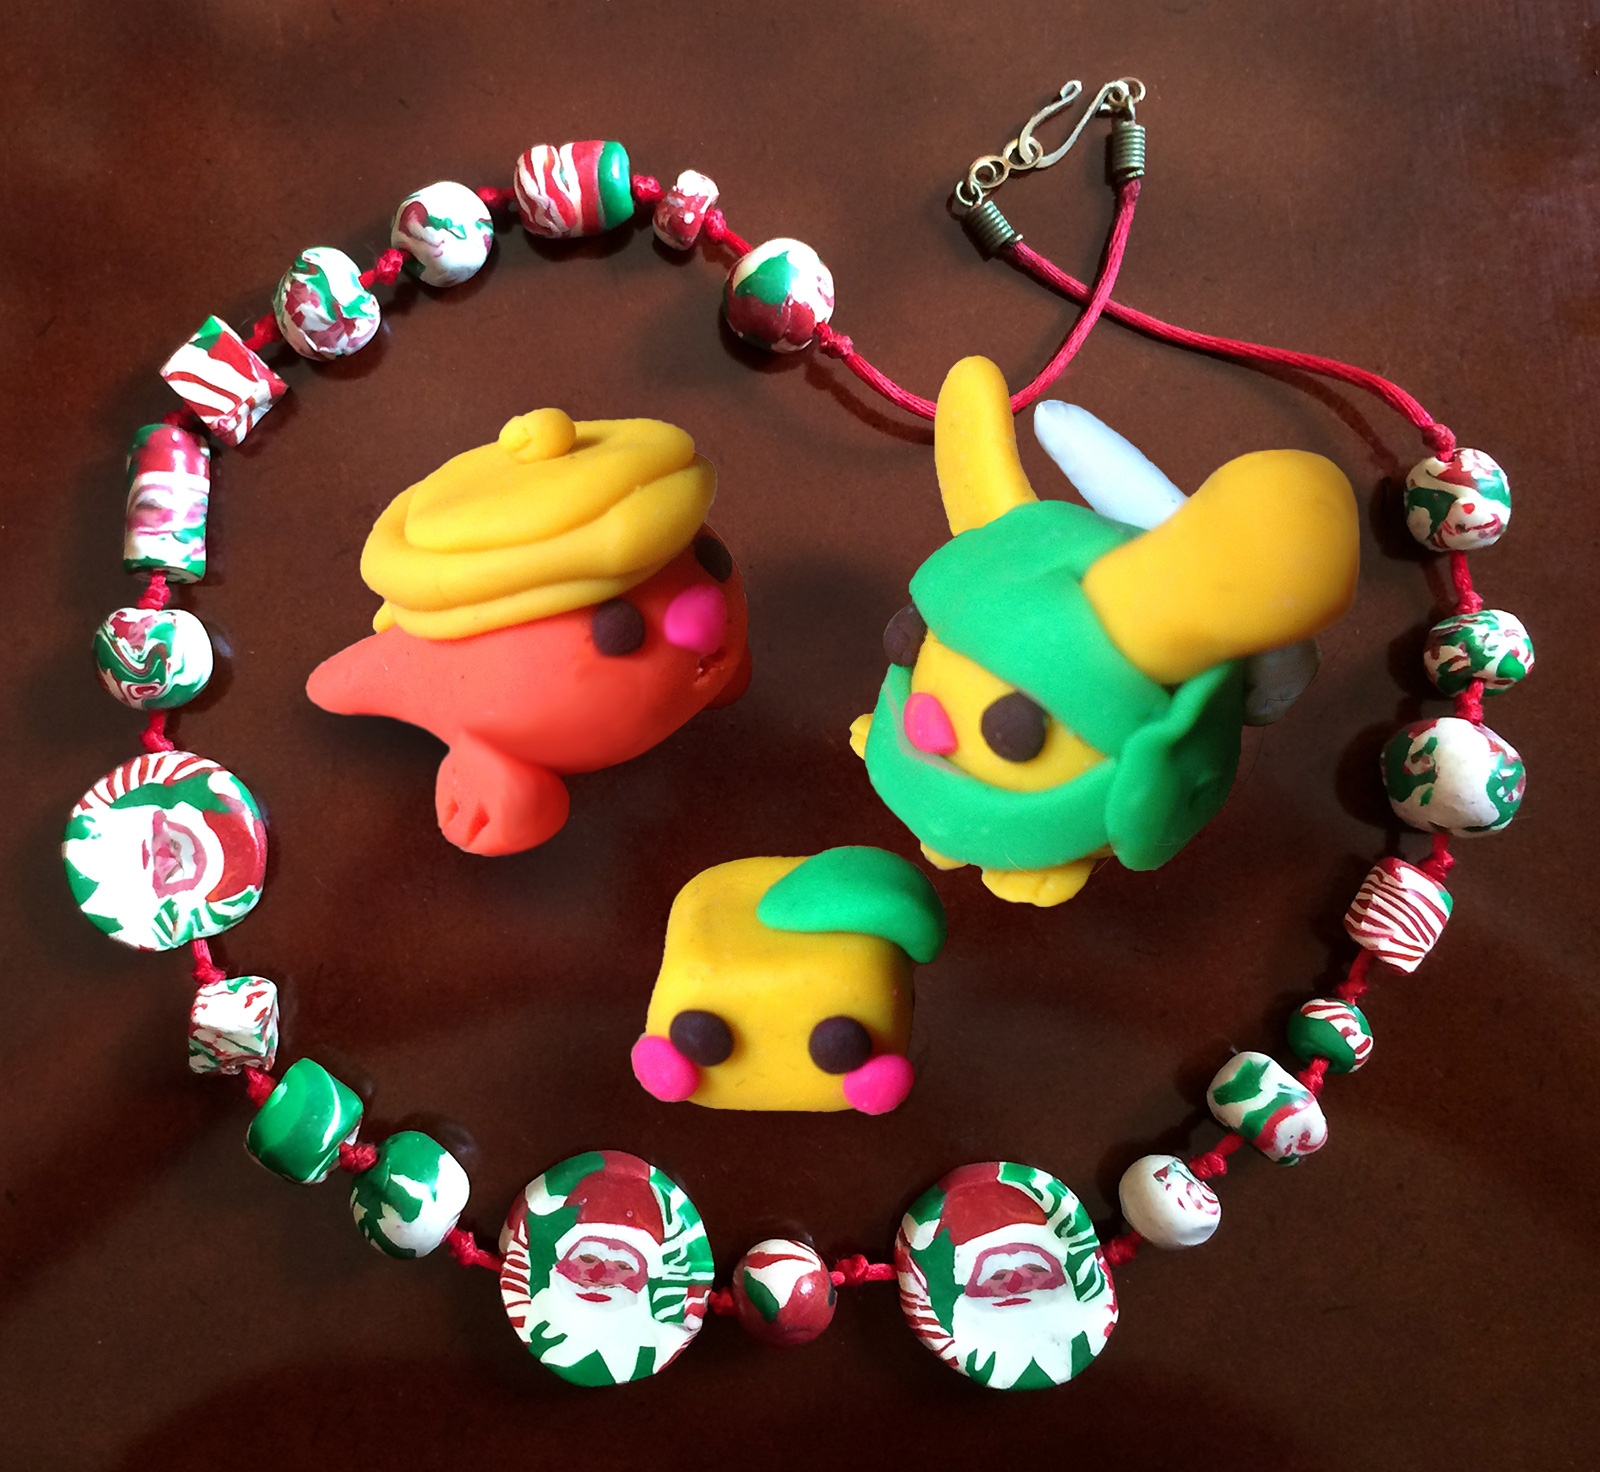 Clay figures and necklace